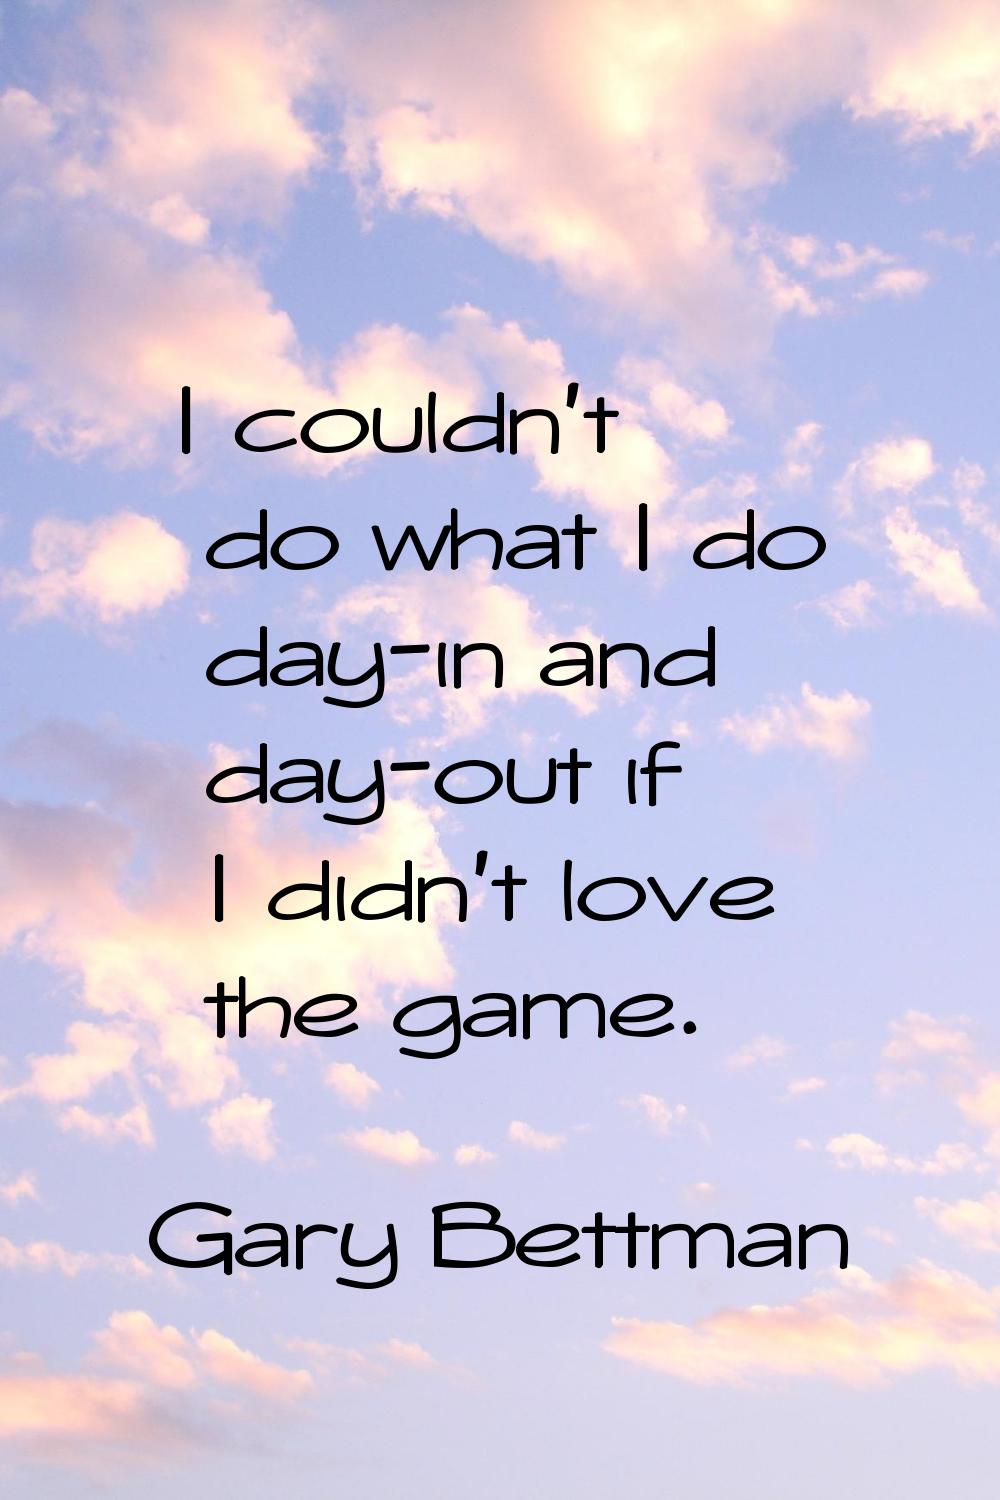 I couldn't do what I do day-in and day-out if I didn't love the game.